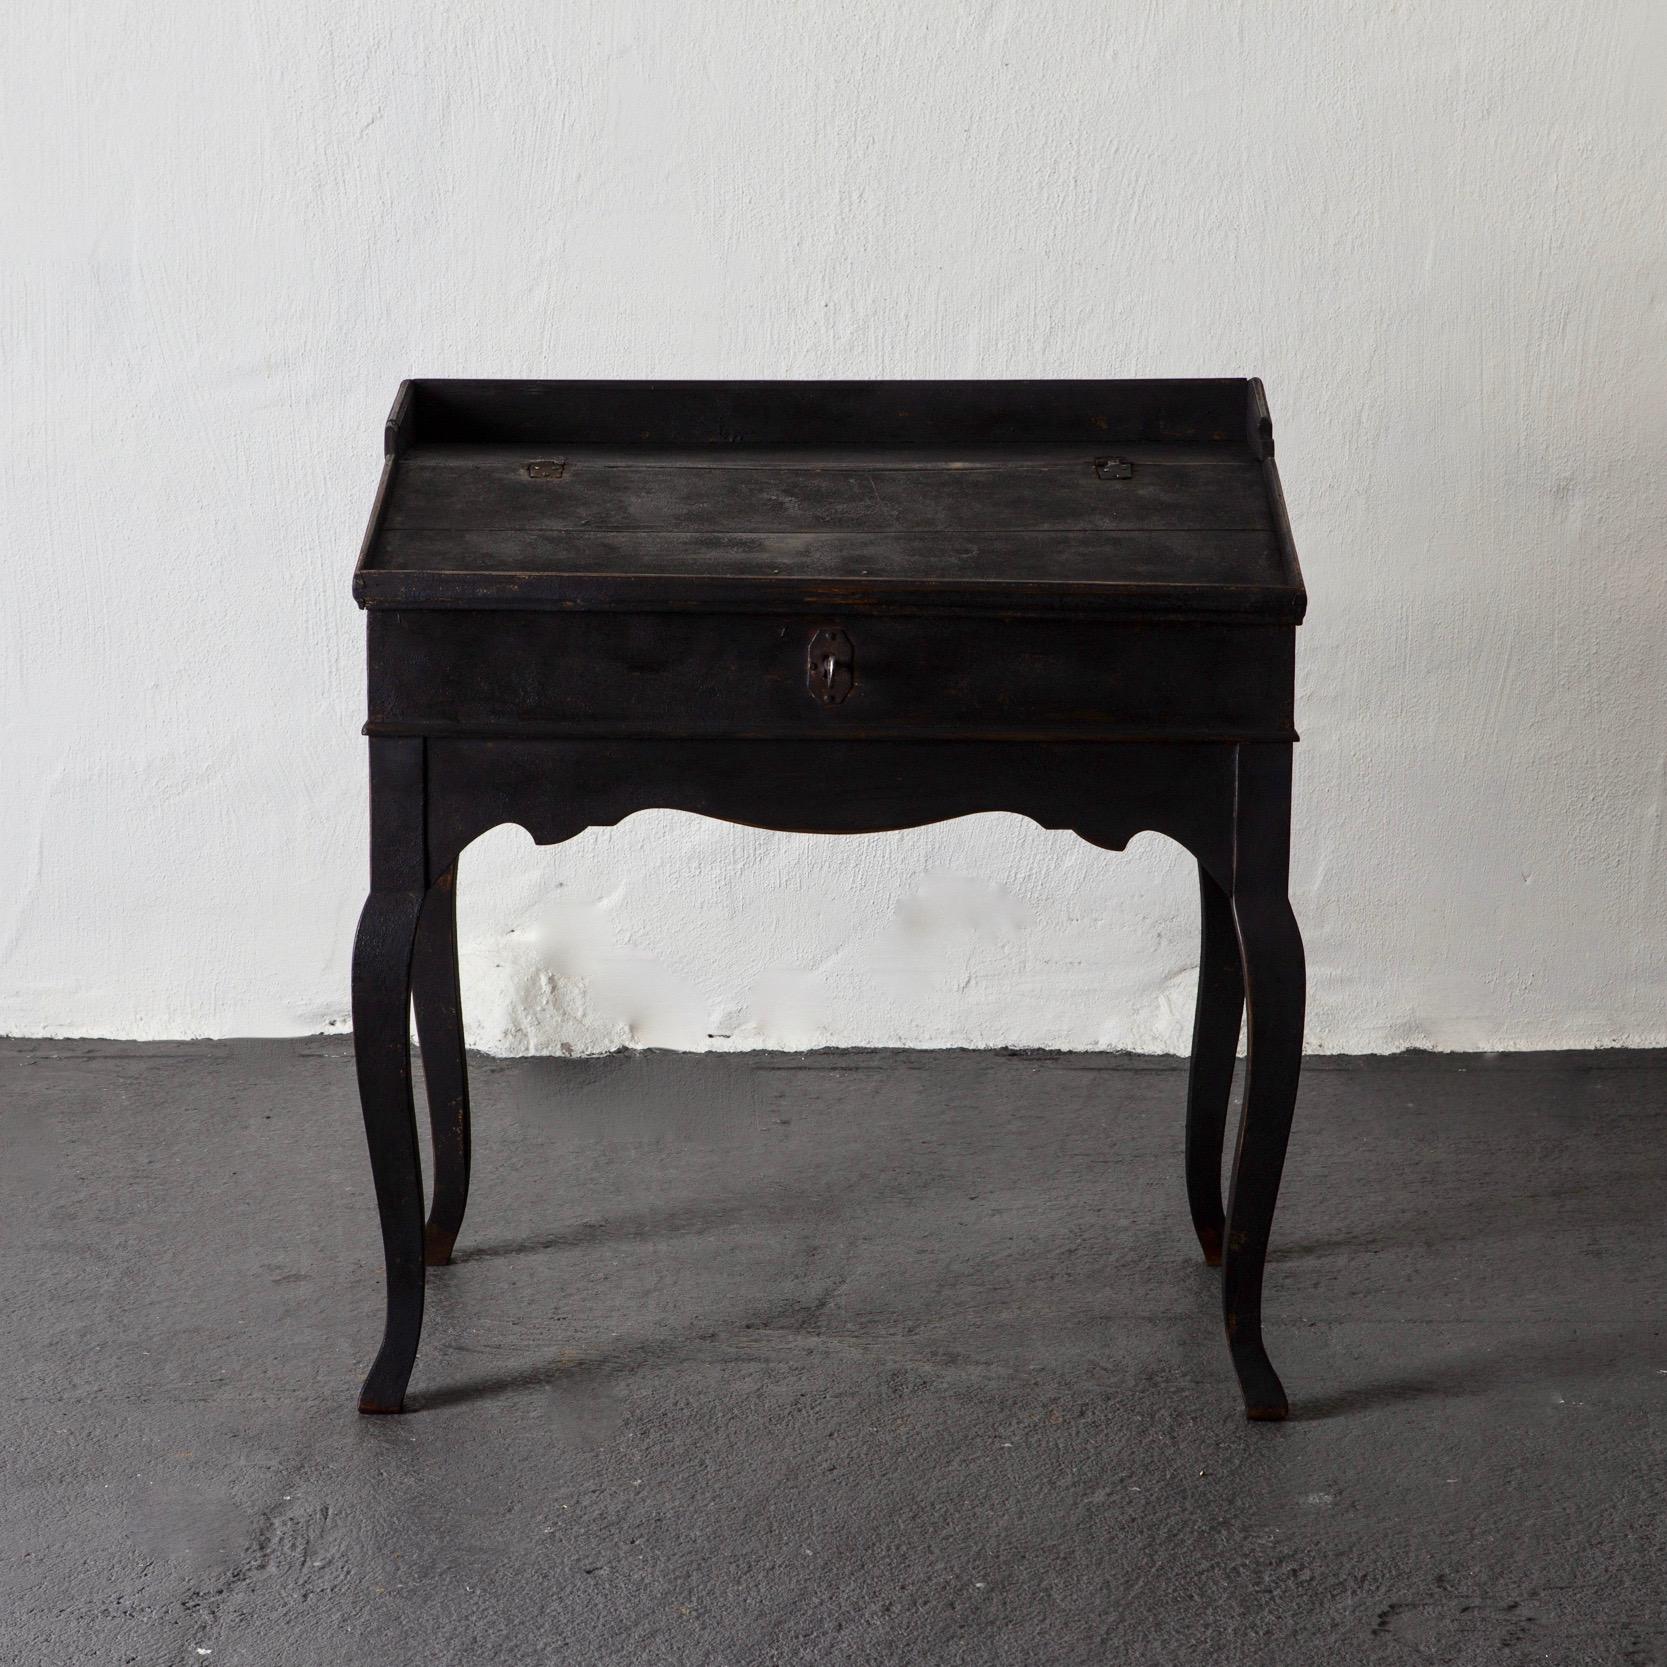 Secretary writing desk Swedish black blue interior, 18th century, Sweden. A secretary made during the 18th century repainted in our Laserow Black with a faded blue interior. Cabriole legs. Measures: Height to apron: 22”.

 